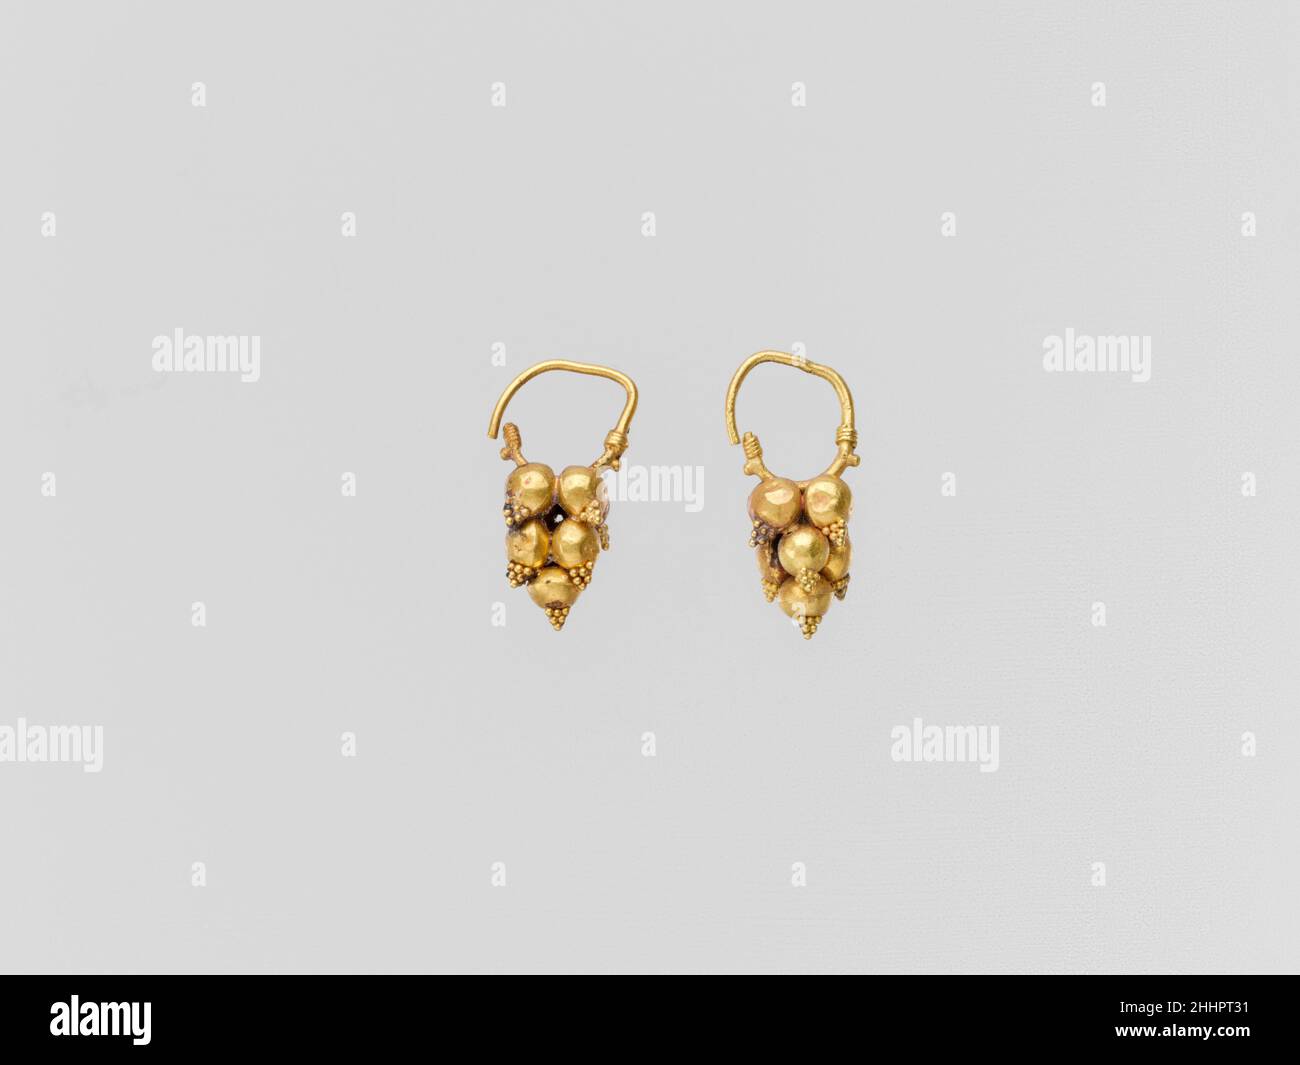 Gold earring with clustered spheres and pyramidal granulation 2nd–3rd century A.D. Roman Gold earrings with mulberry ornament.. Gold earring with clustered spheres and pyramidal granulation. Roman. 2nd–3rd century A.D.. Gold. Imperial. Gold and Silver Stock Photo